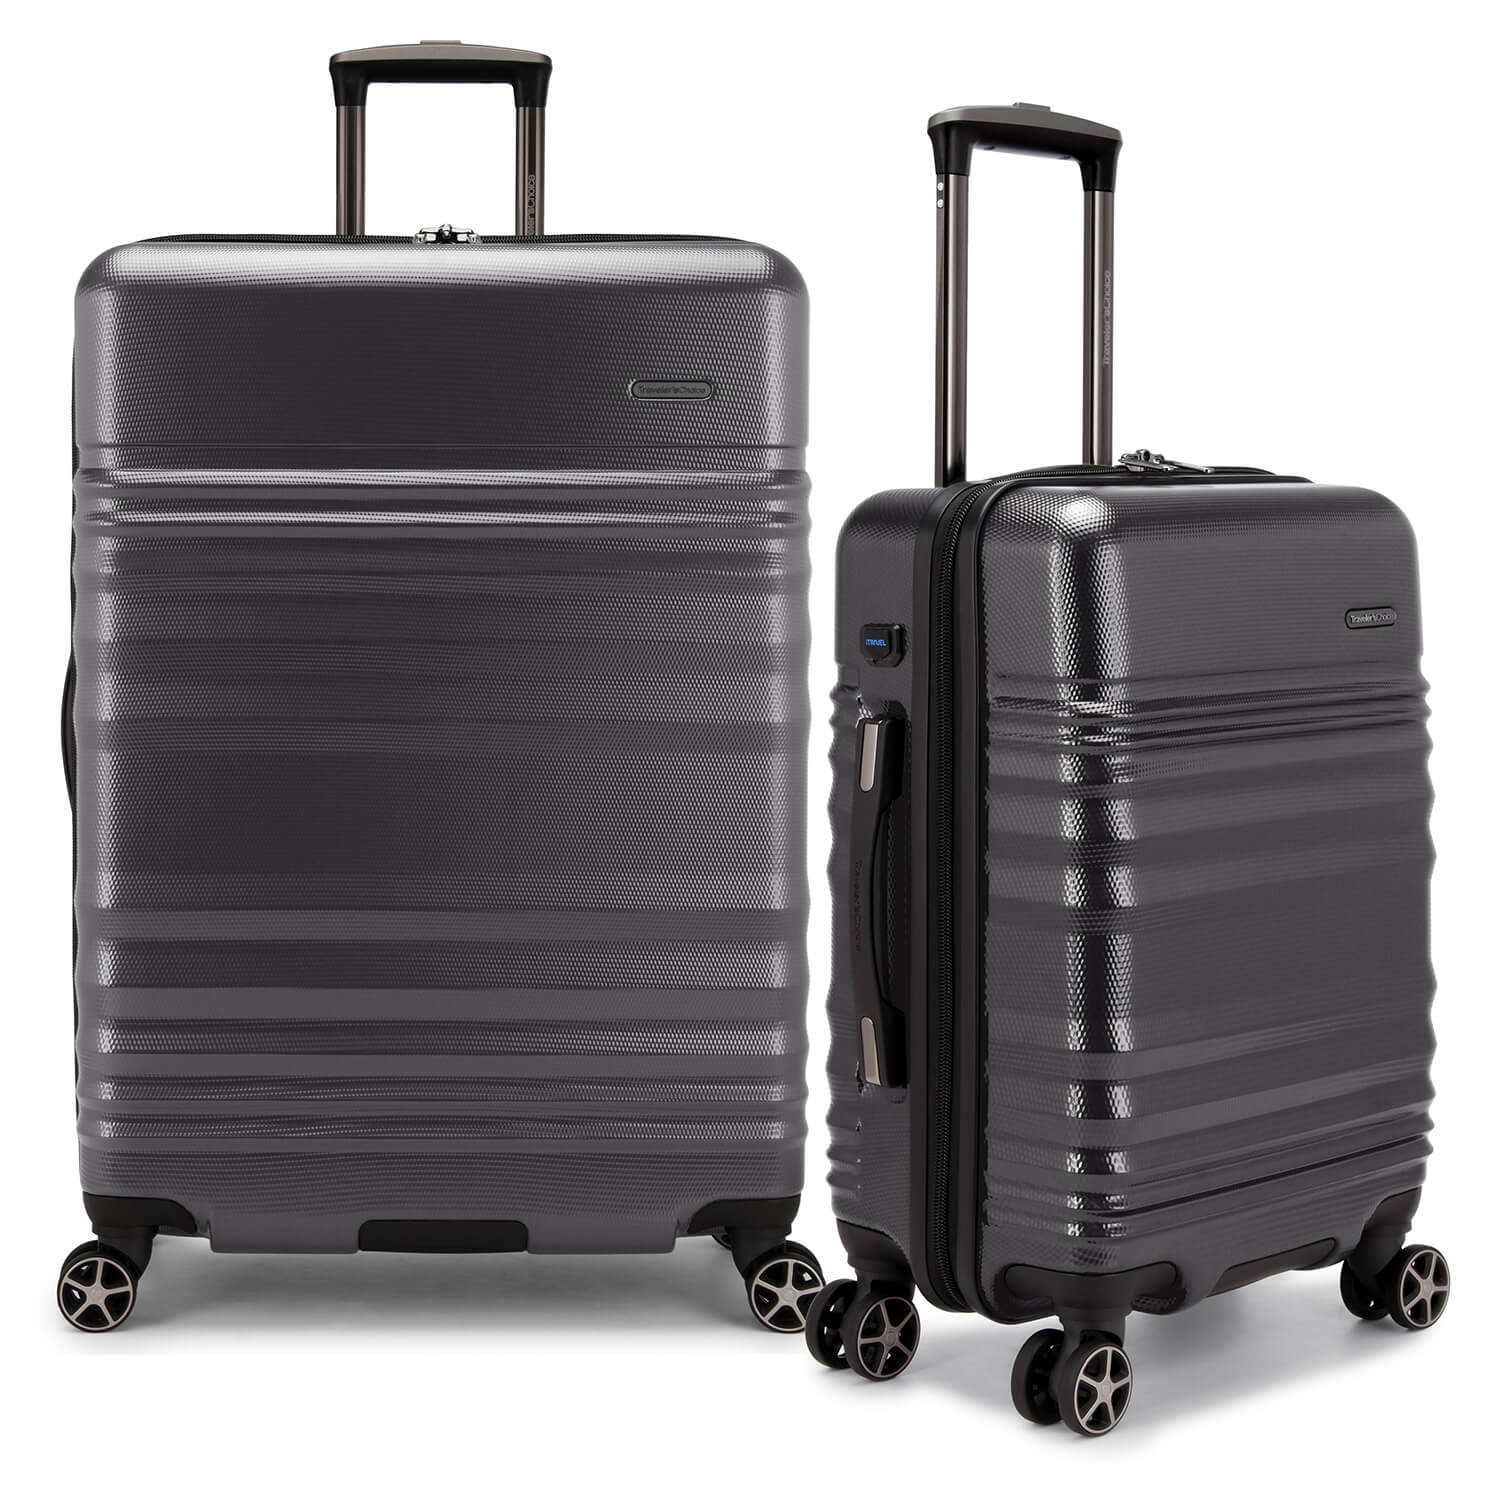 An image of a gray luggage.